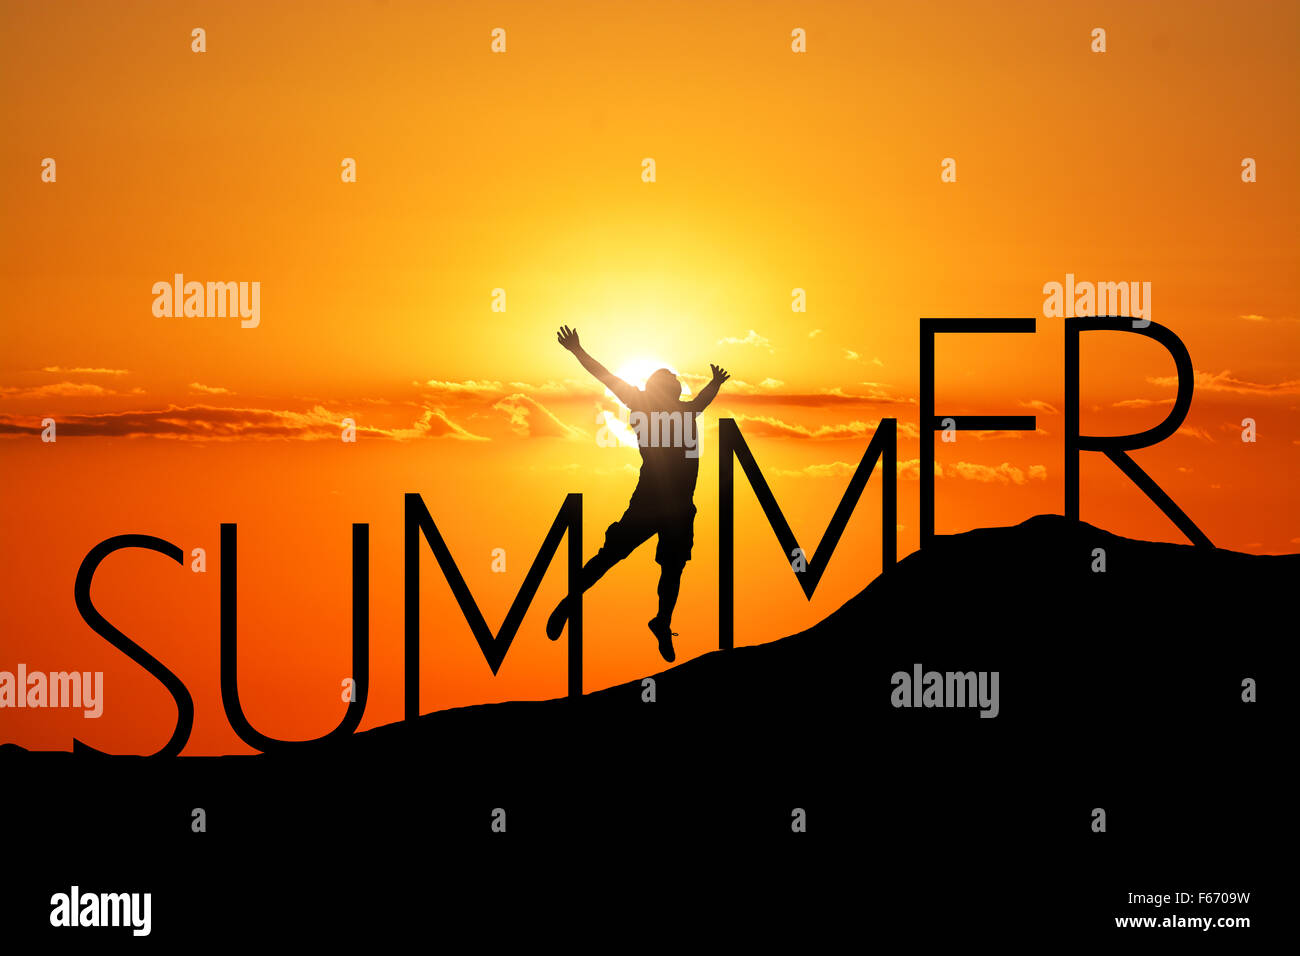 Summer Season concept with sunset text and jumping man Stock Photo